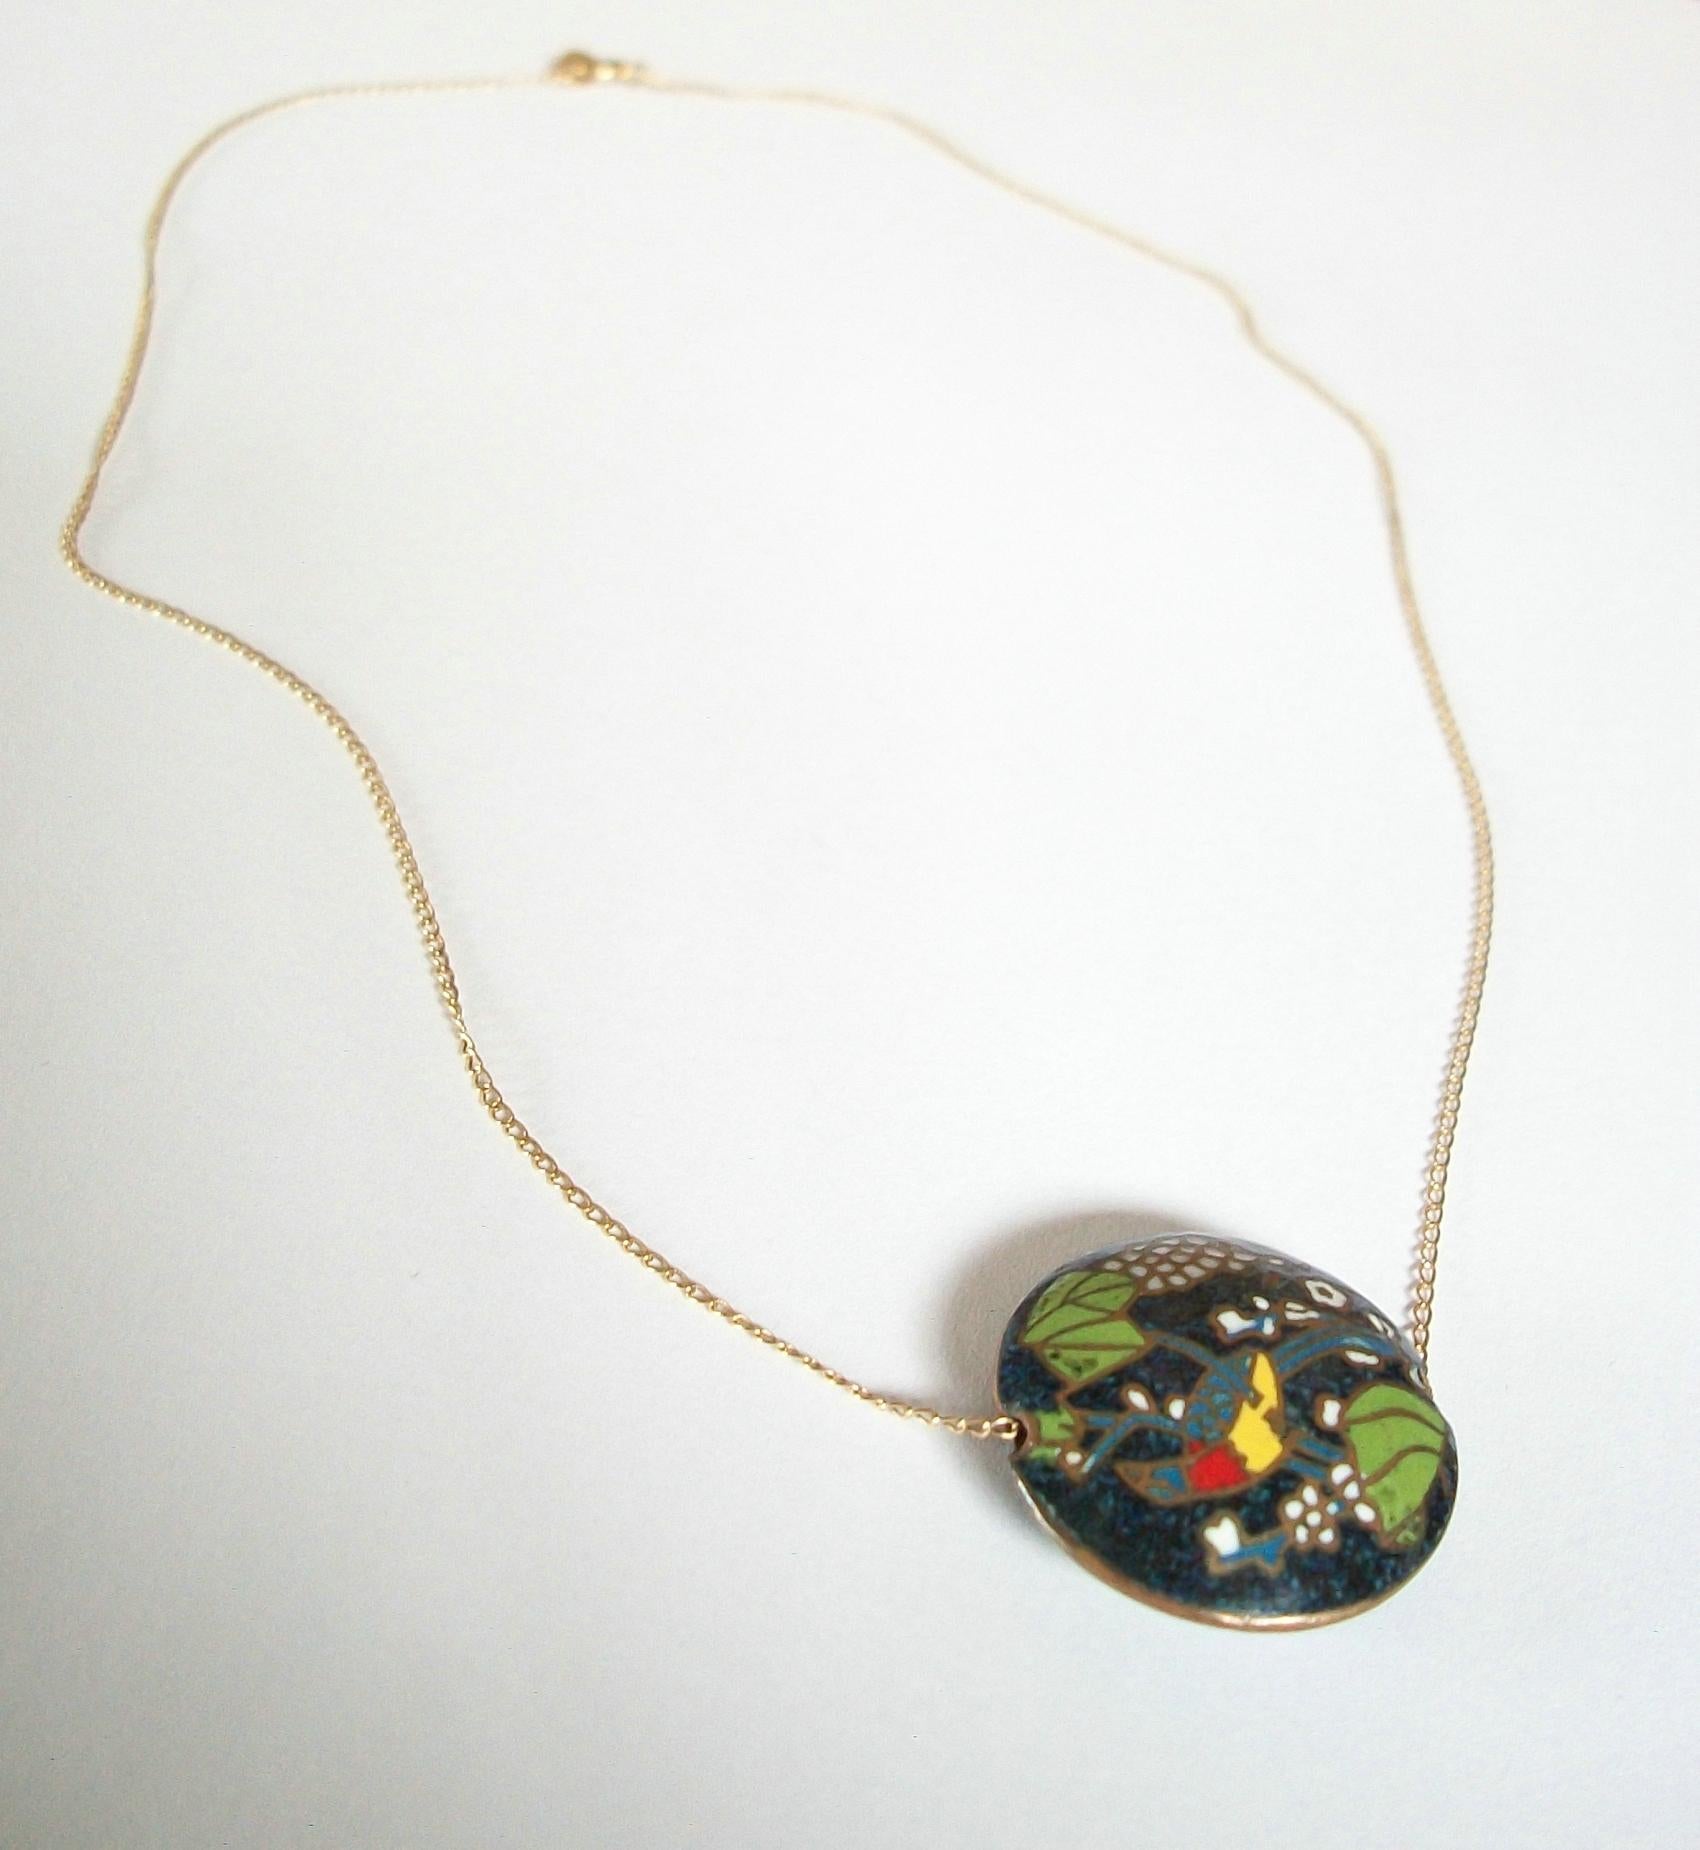 Krementz, 14K Gold Chain Necklace with Enamel Pendant, U.S.A, 20th Century In Good Condition For Sale In Chatham, CA